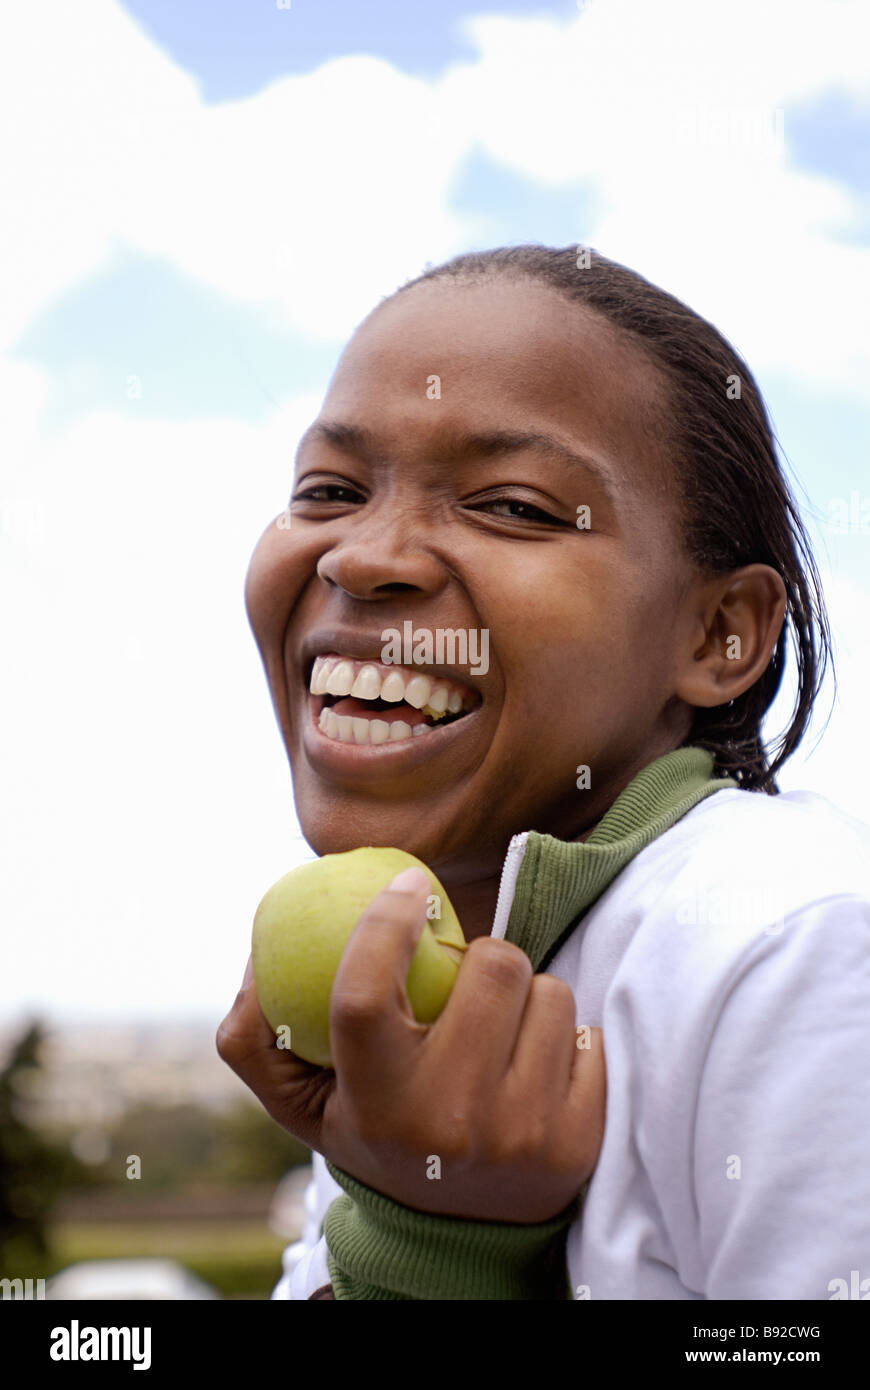 Young girl with apple smiling Cape Town Western Cape Province South Africa Stock Photo